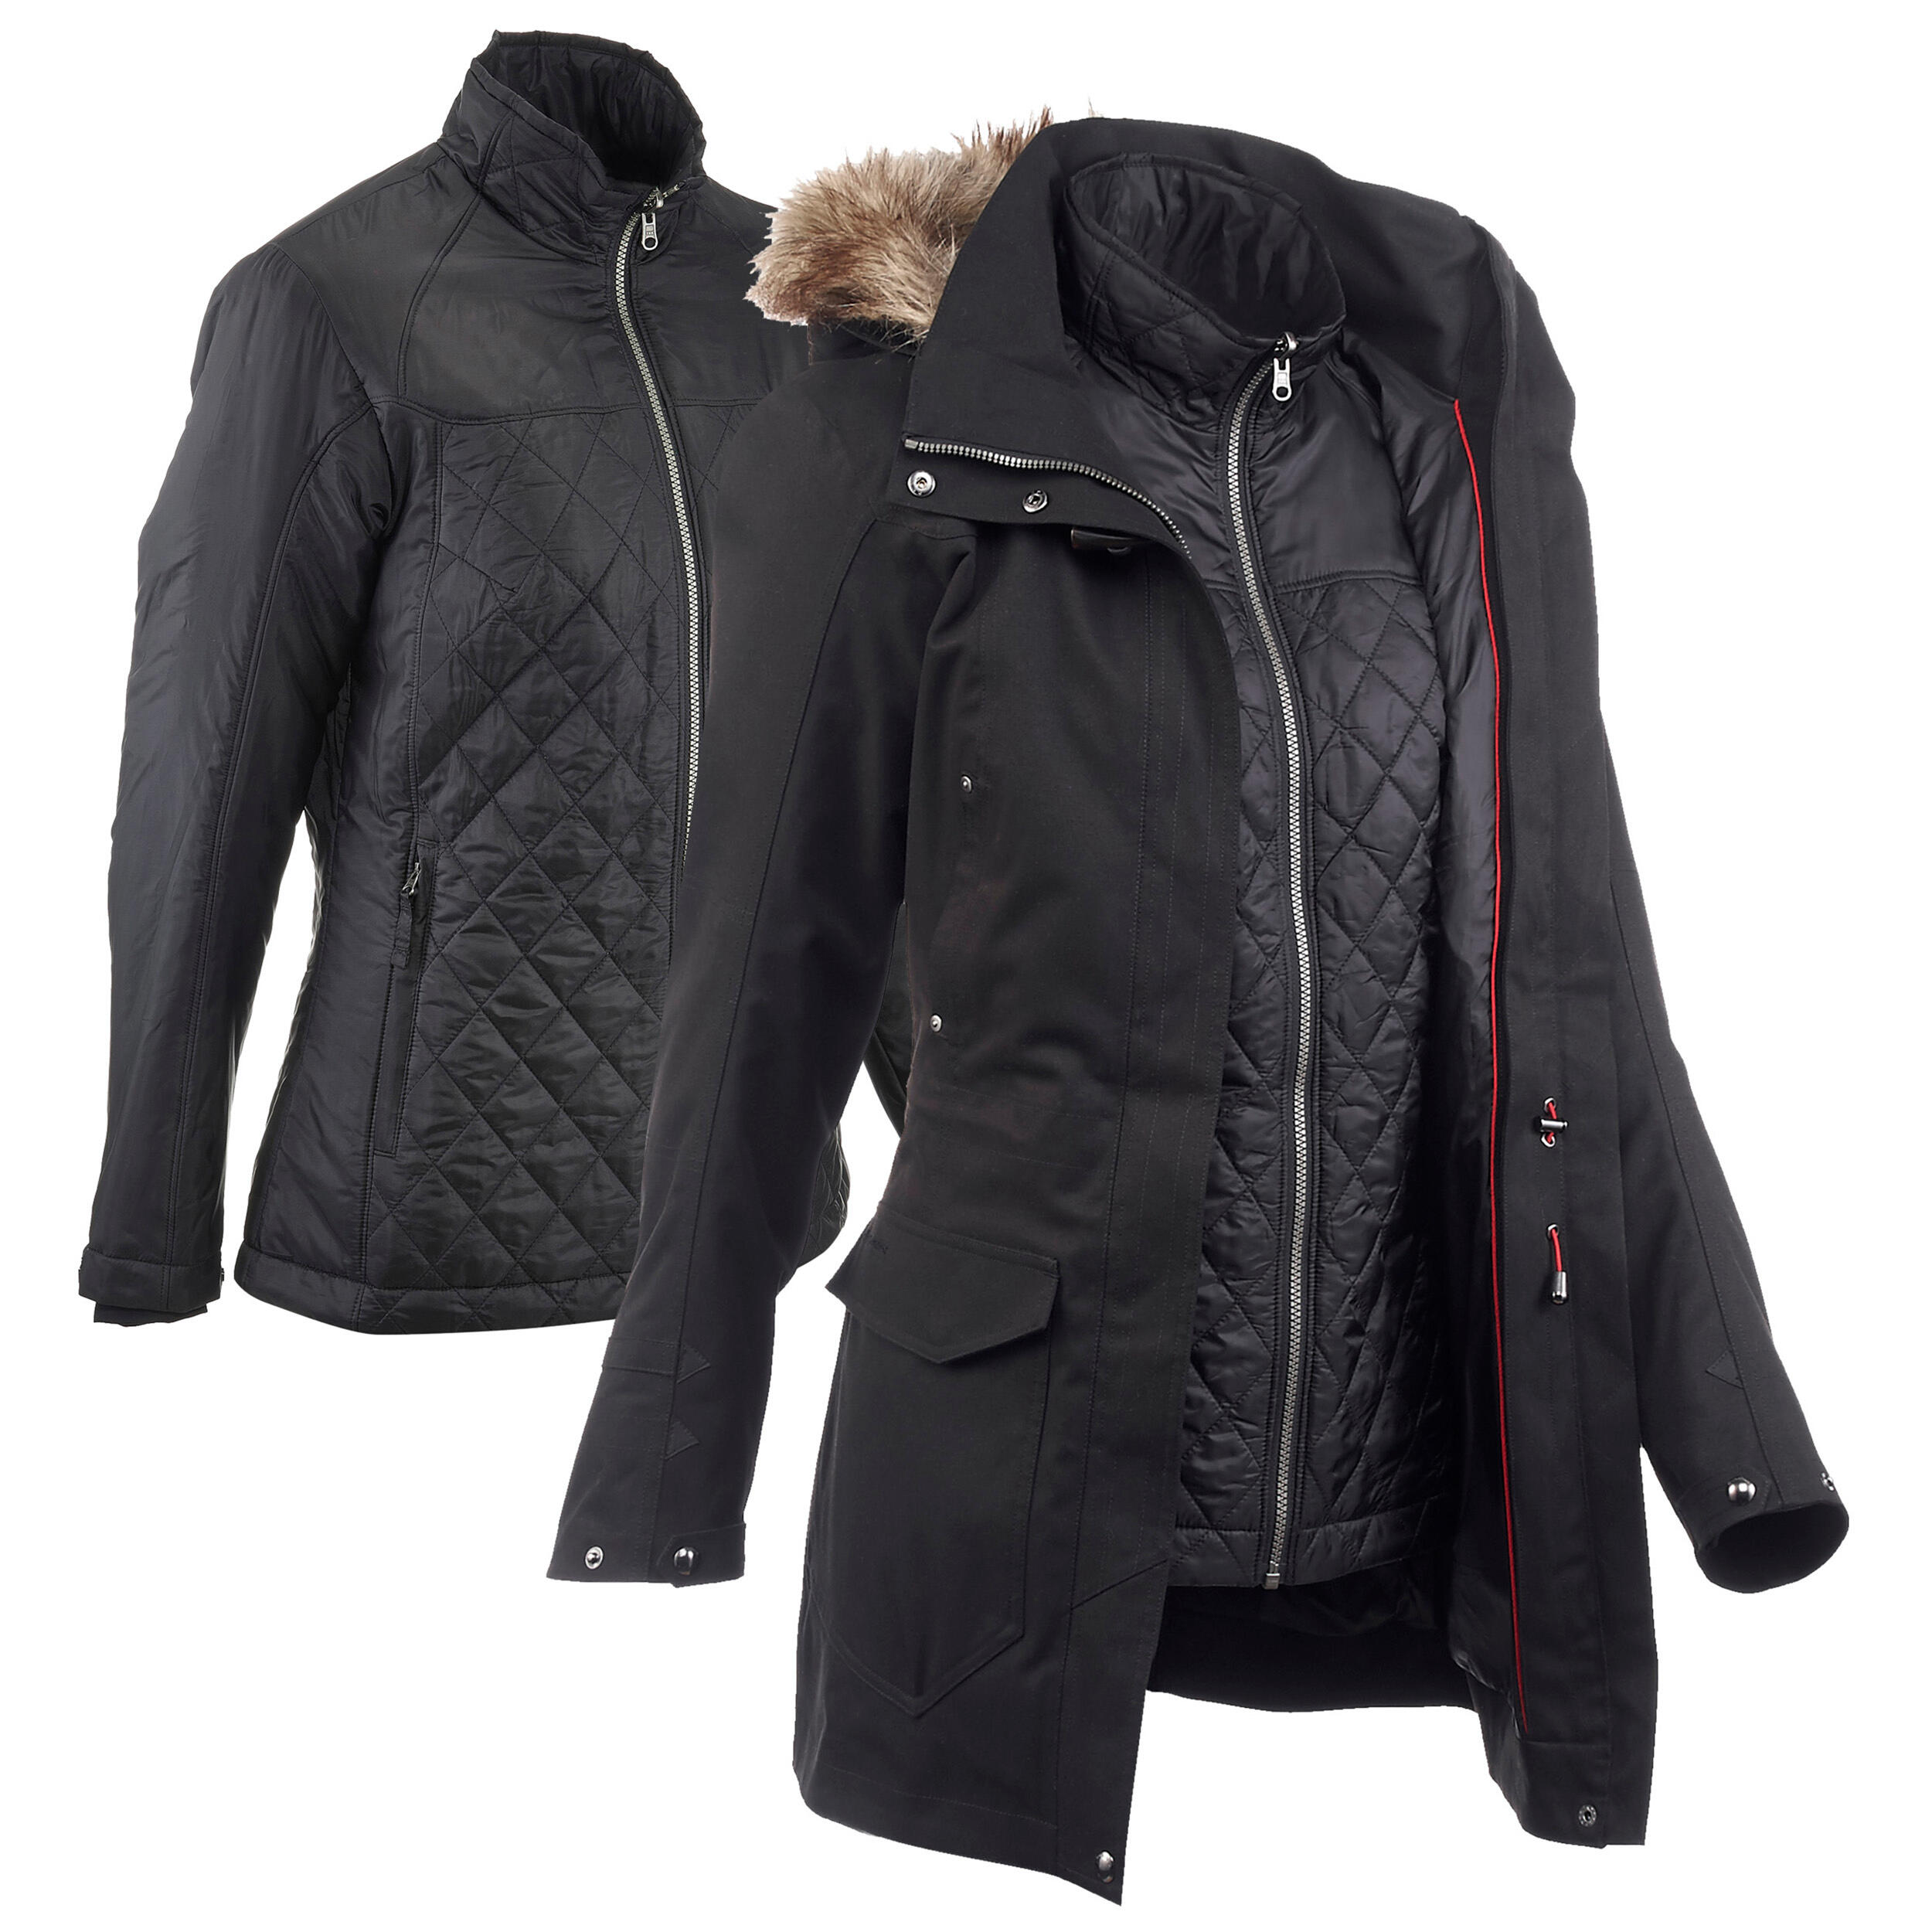 FORCLAZ By Decathlon Women Black Solid Insulator Mountain Trekking Puffer  Jacket Price in India, Full Specifications & Offers | DTashion.com